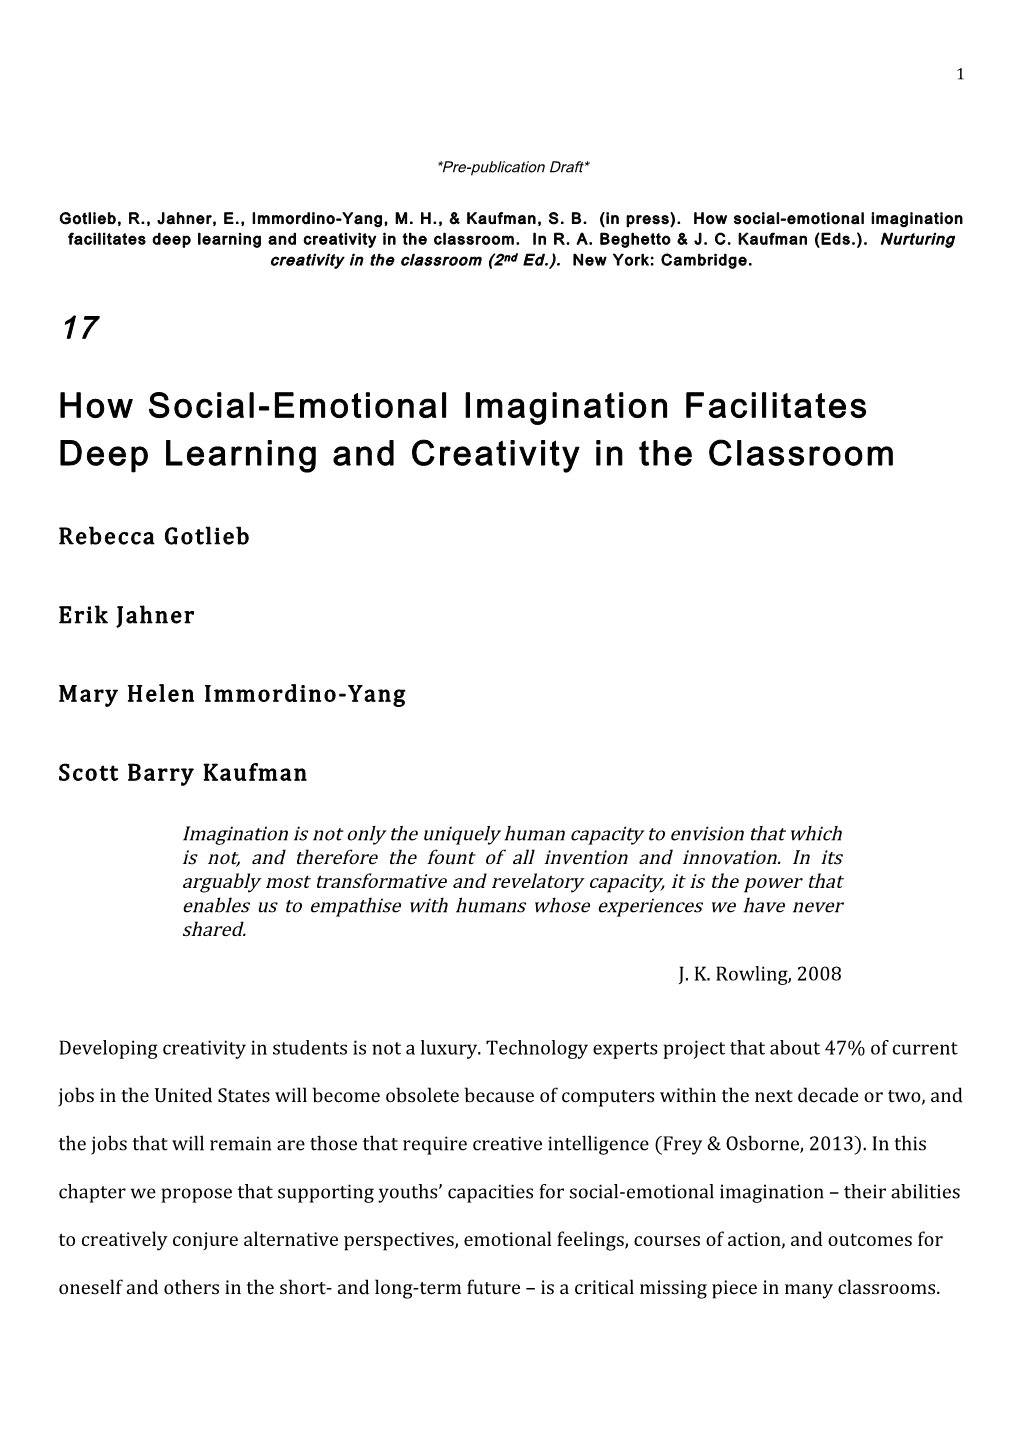 How Social-Emotional Imagination Facilitates Deep Learning and Creativity in the Classroom